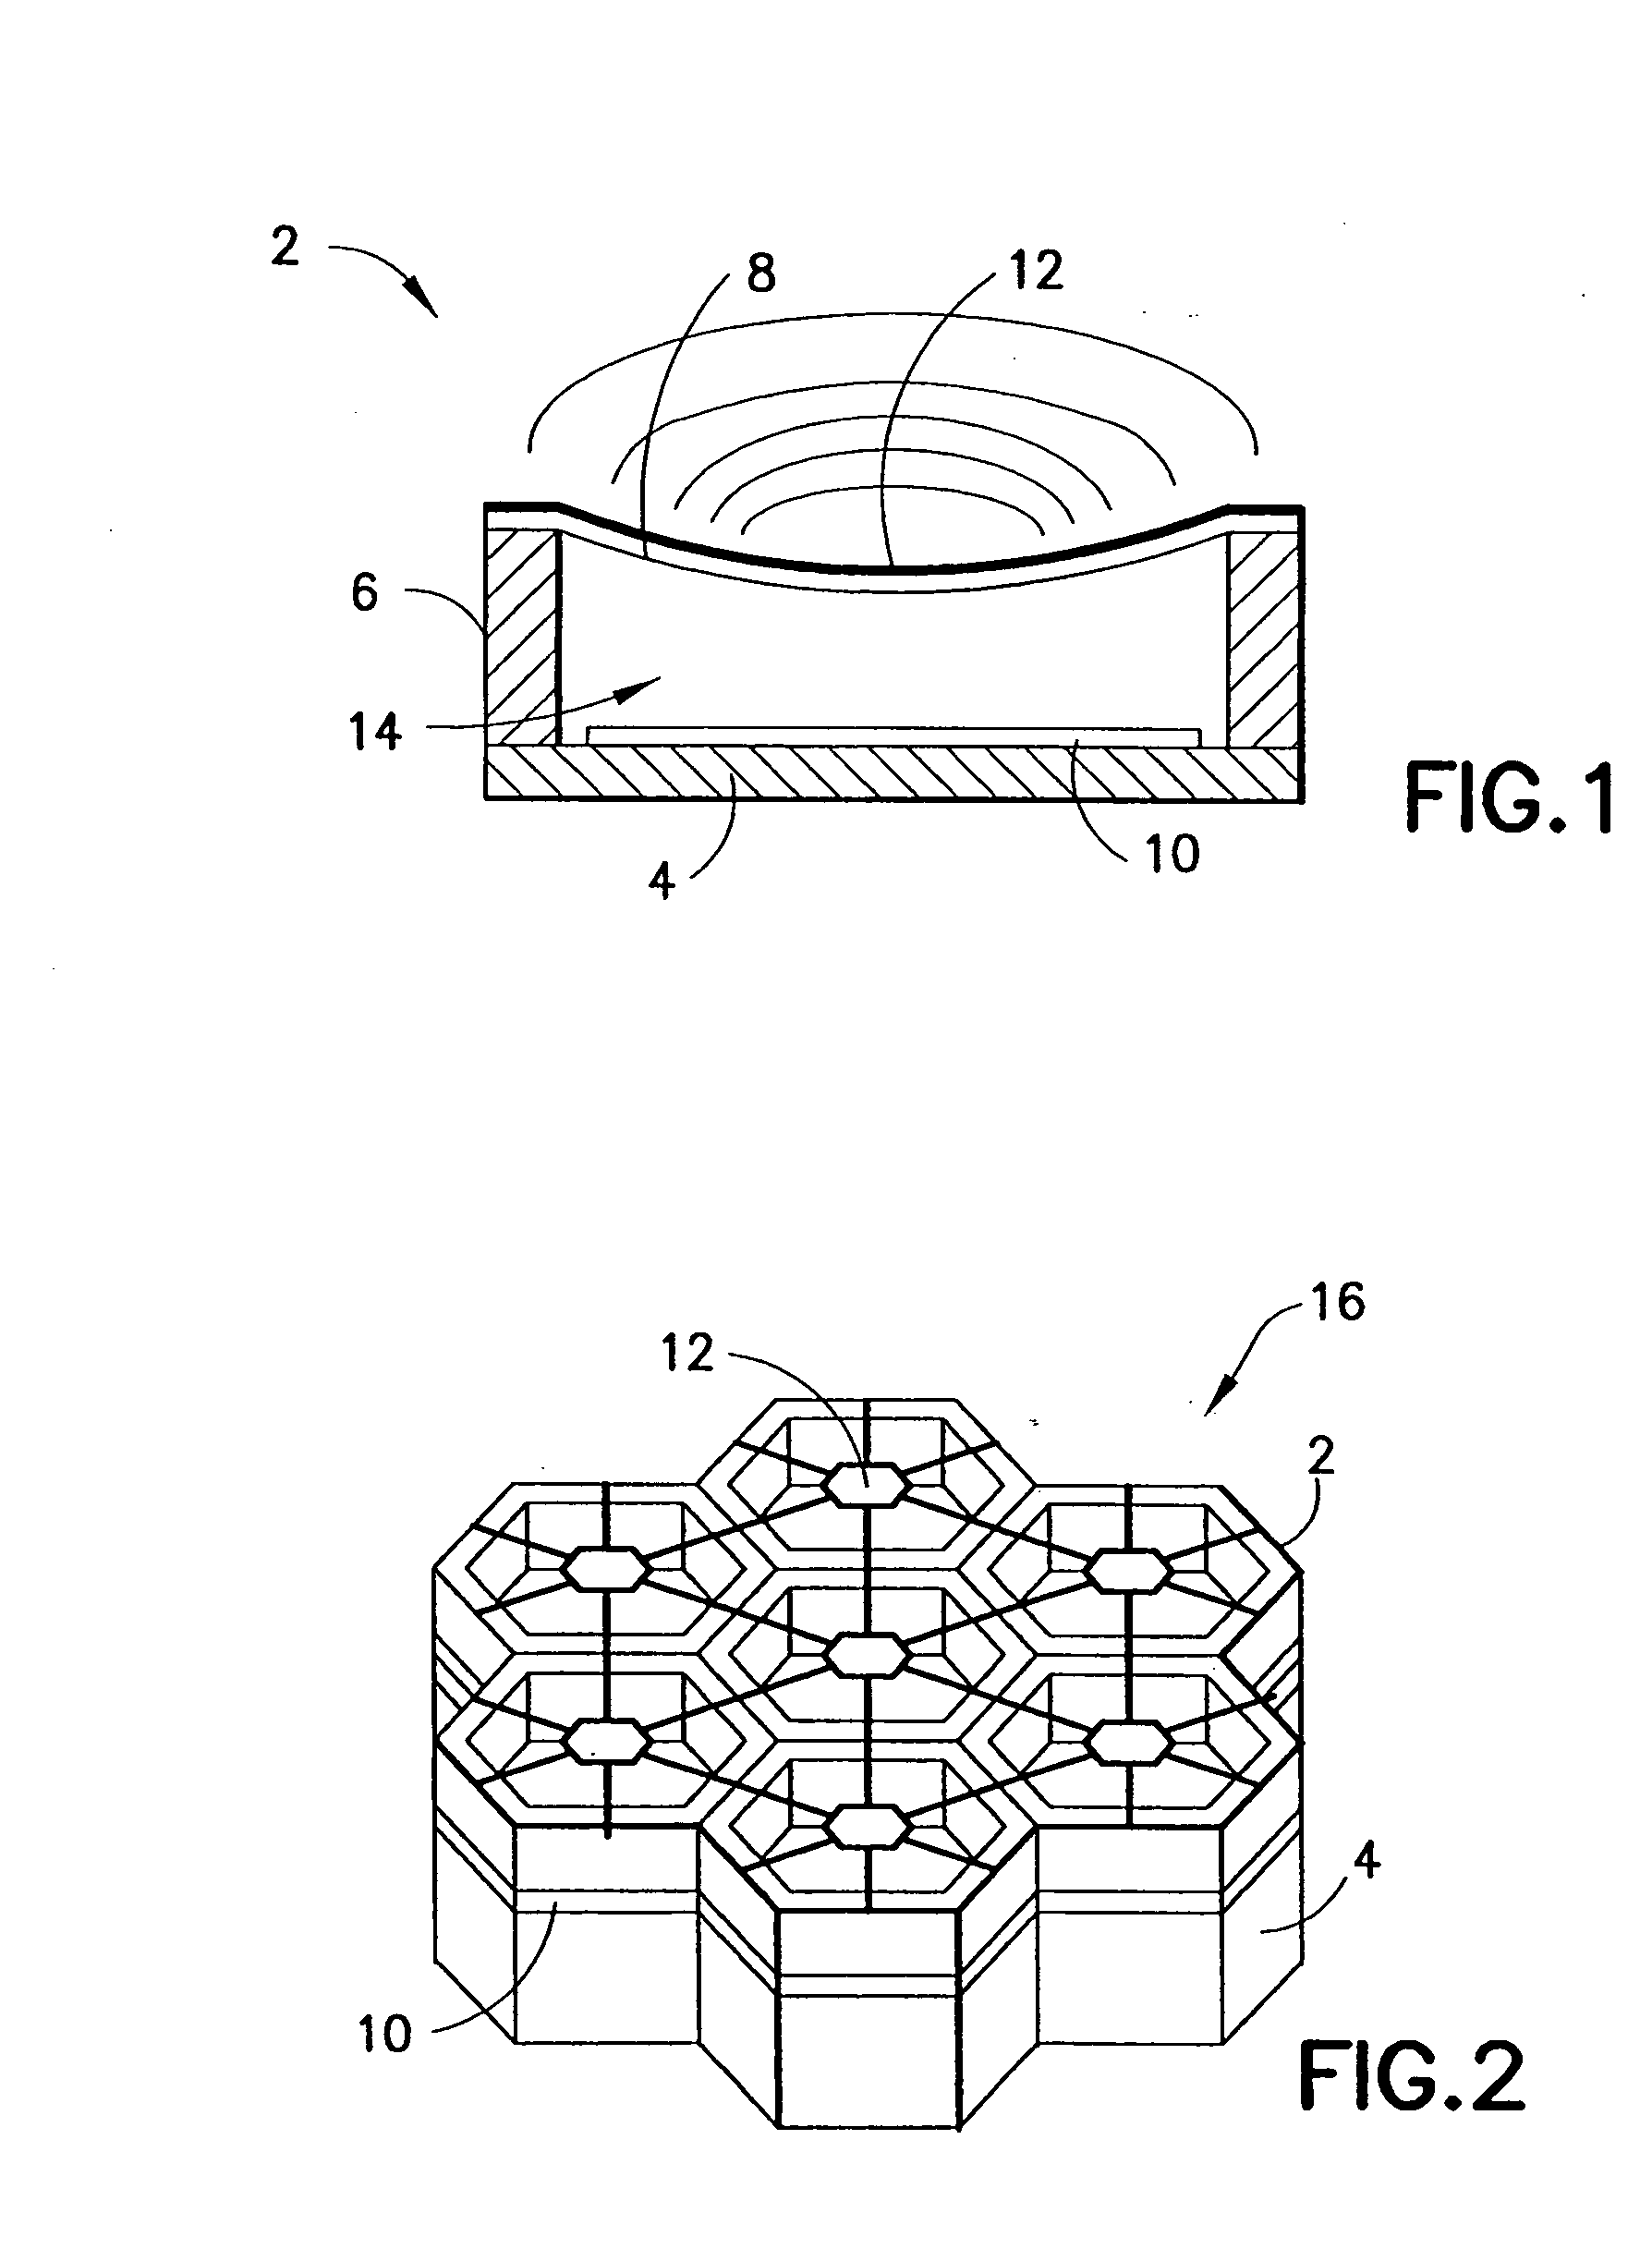 Switching circuitry for reconfigurable arrays of sensor elements